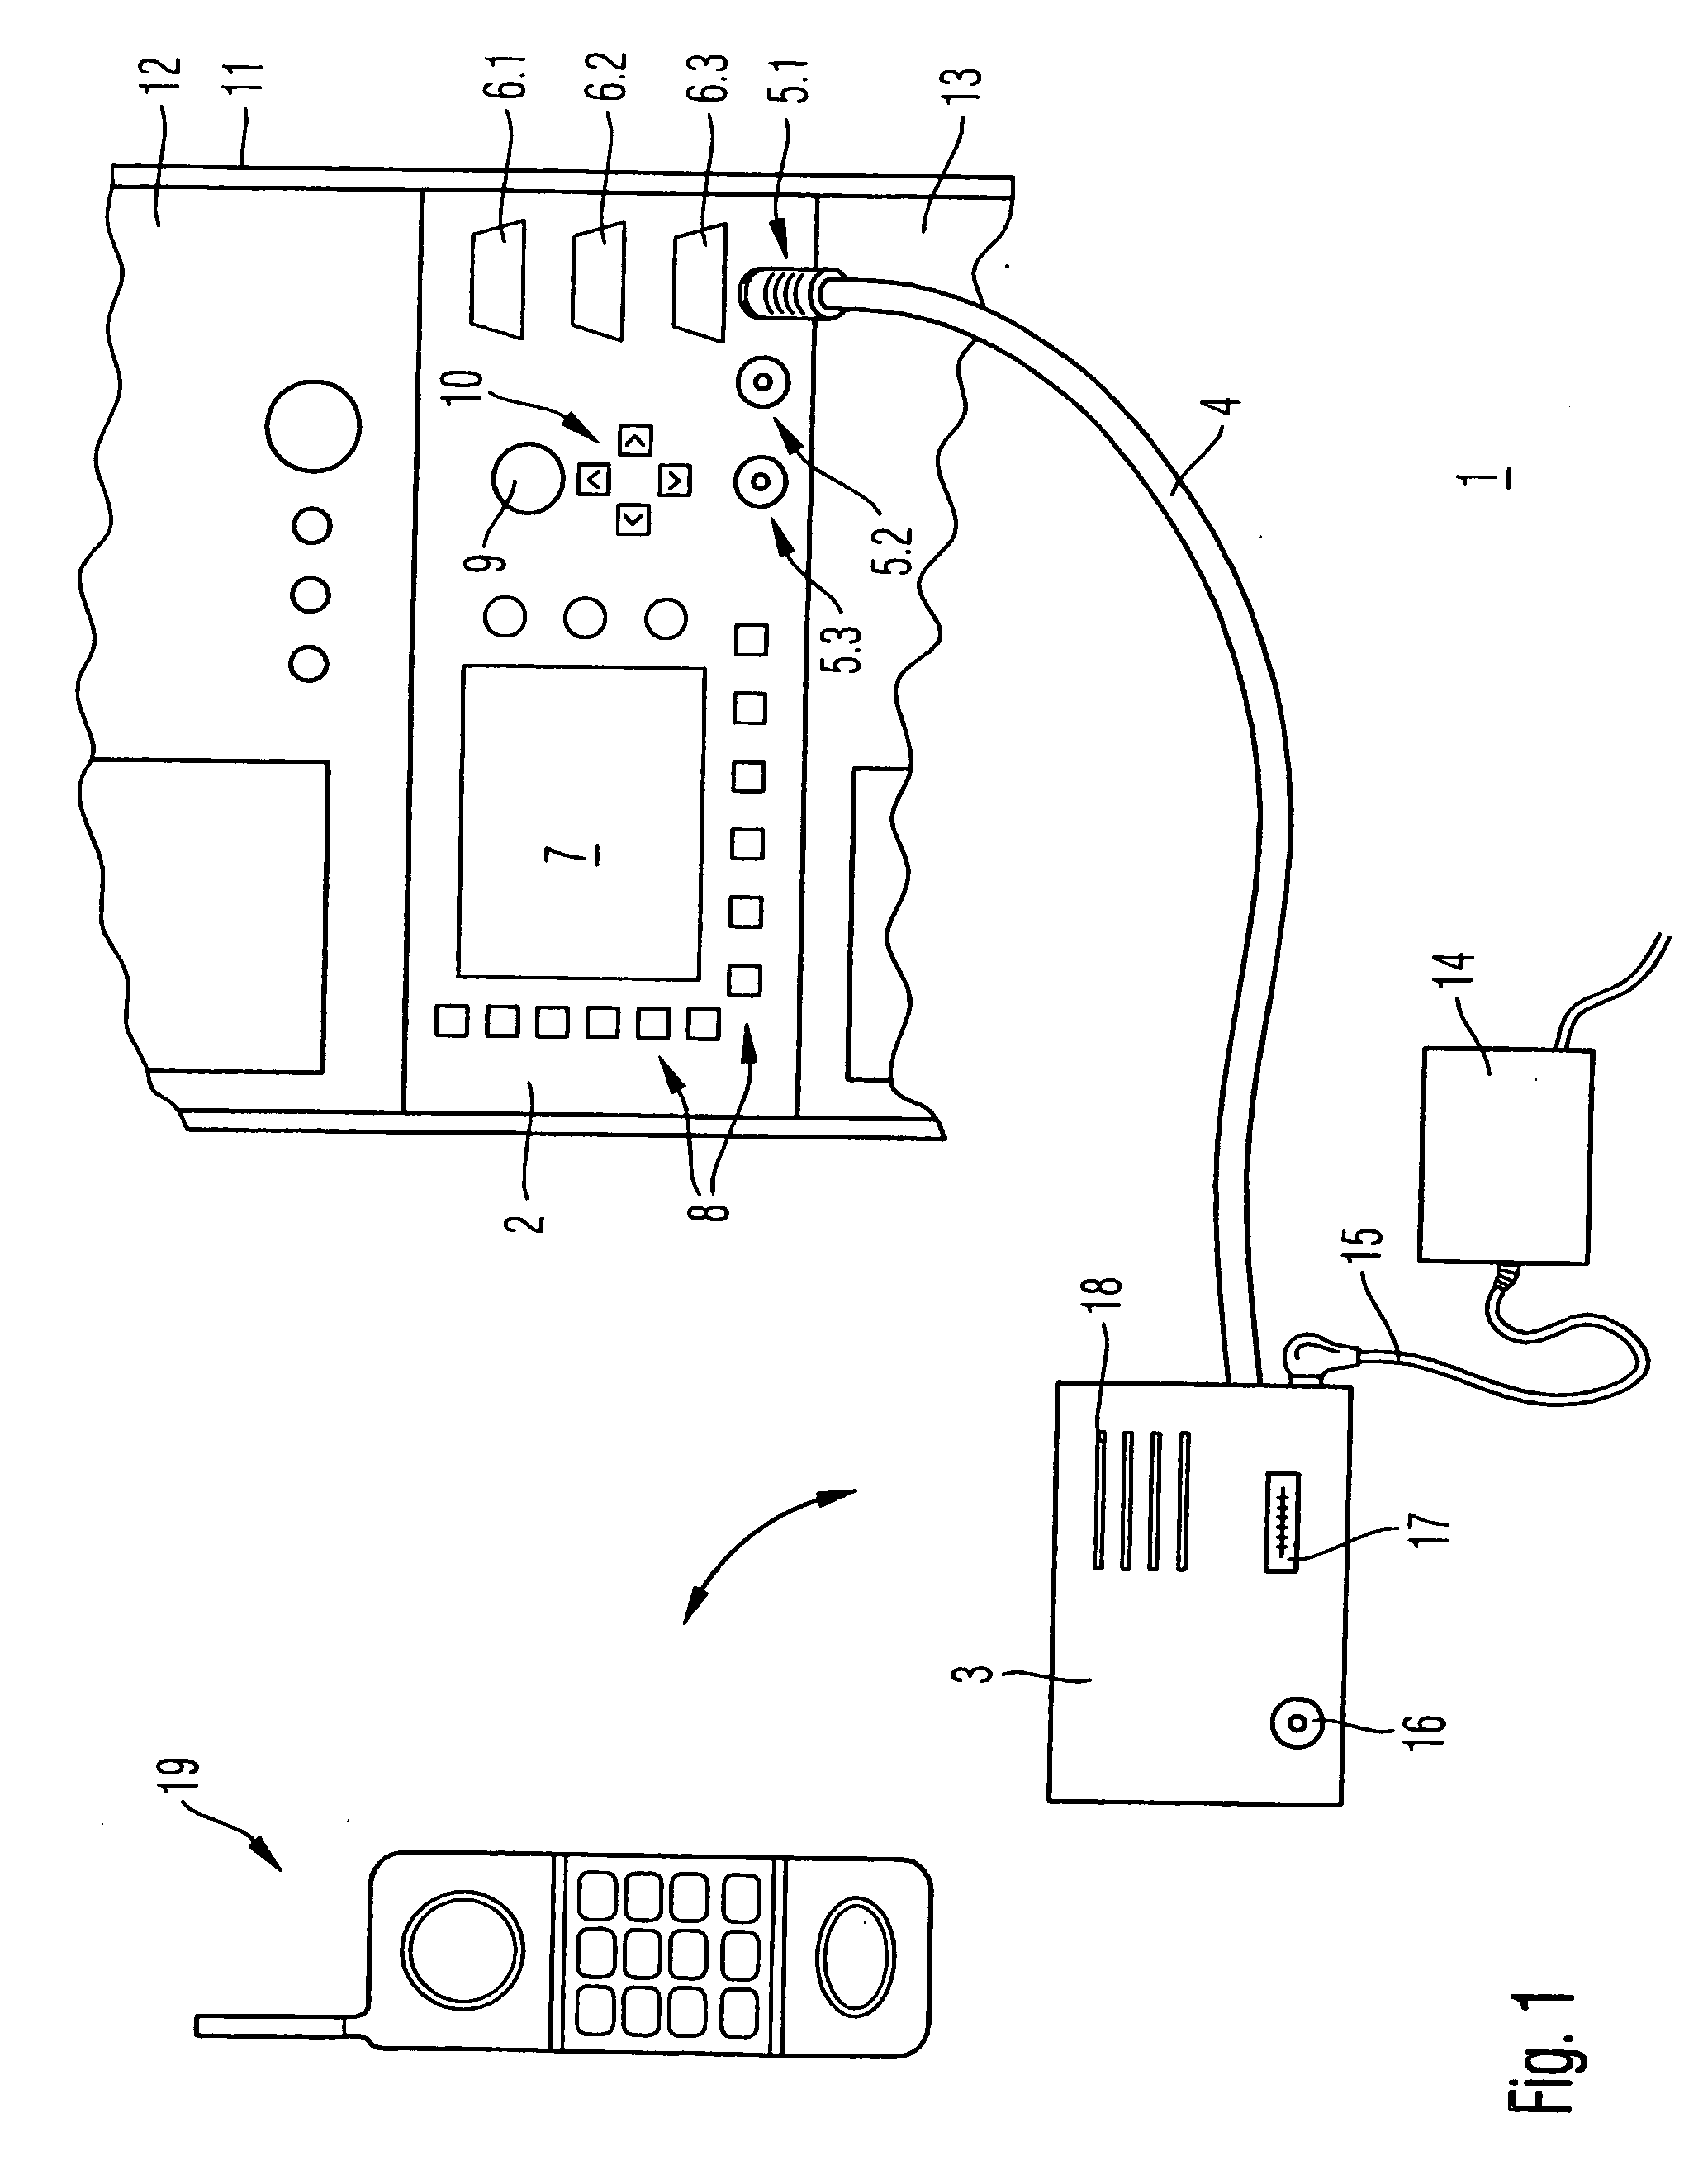 High-frequency measuring system having spatially separated high-frequency modules